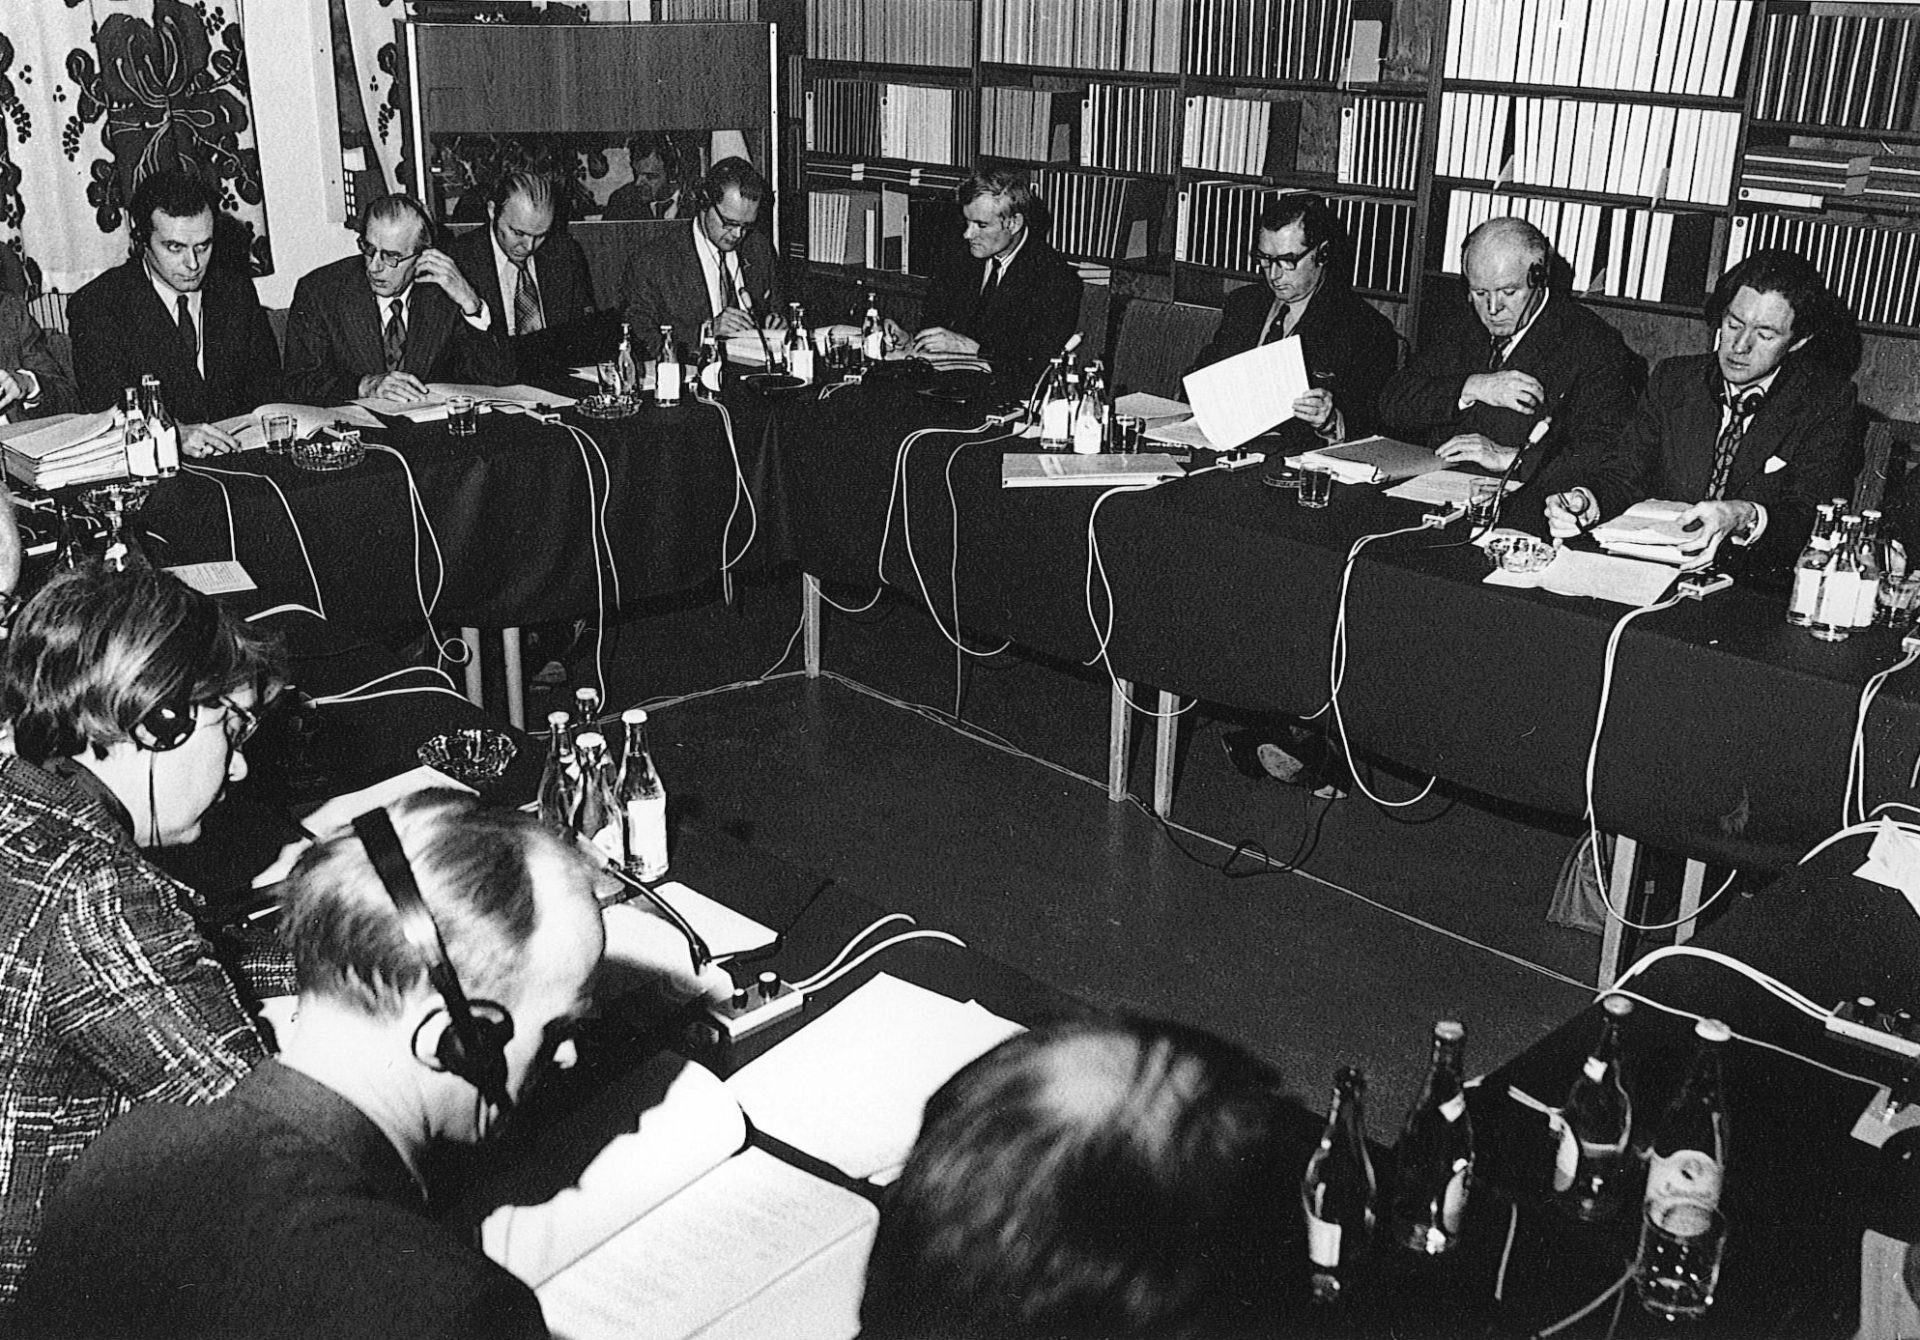 The first Council meeting held in Kiruna in 1976